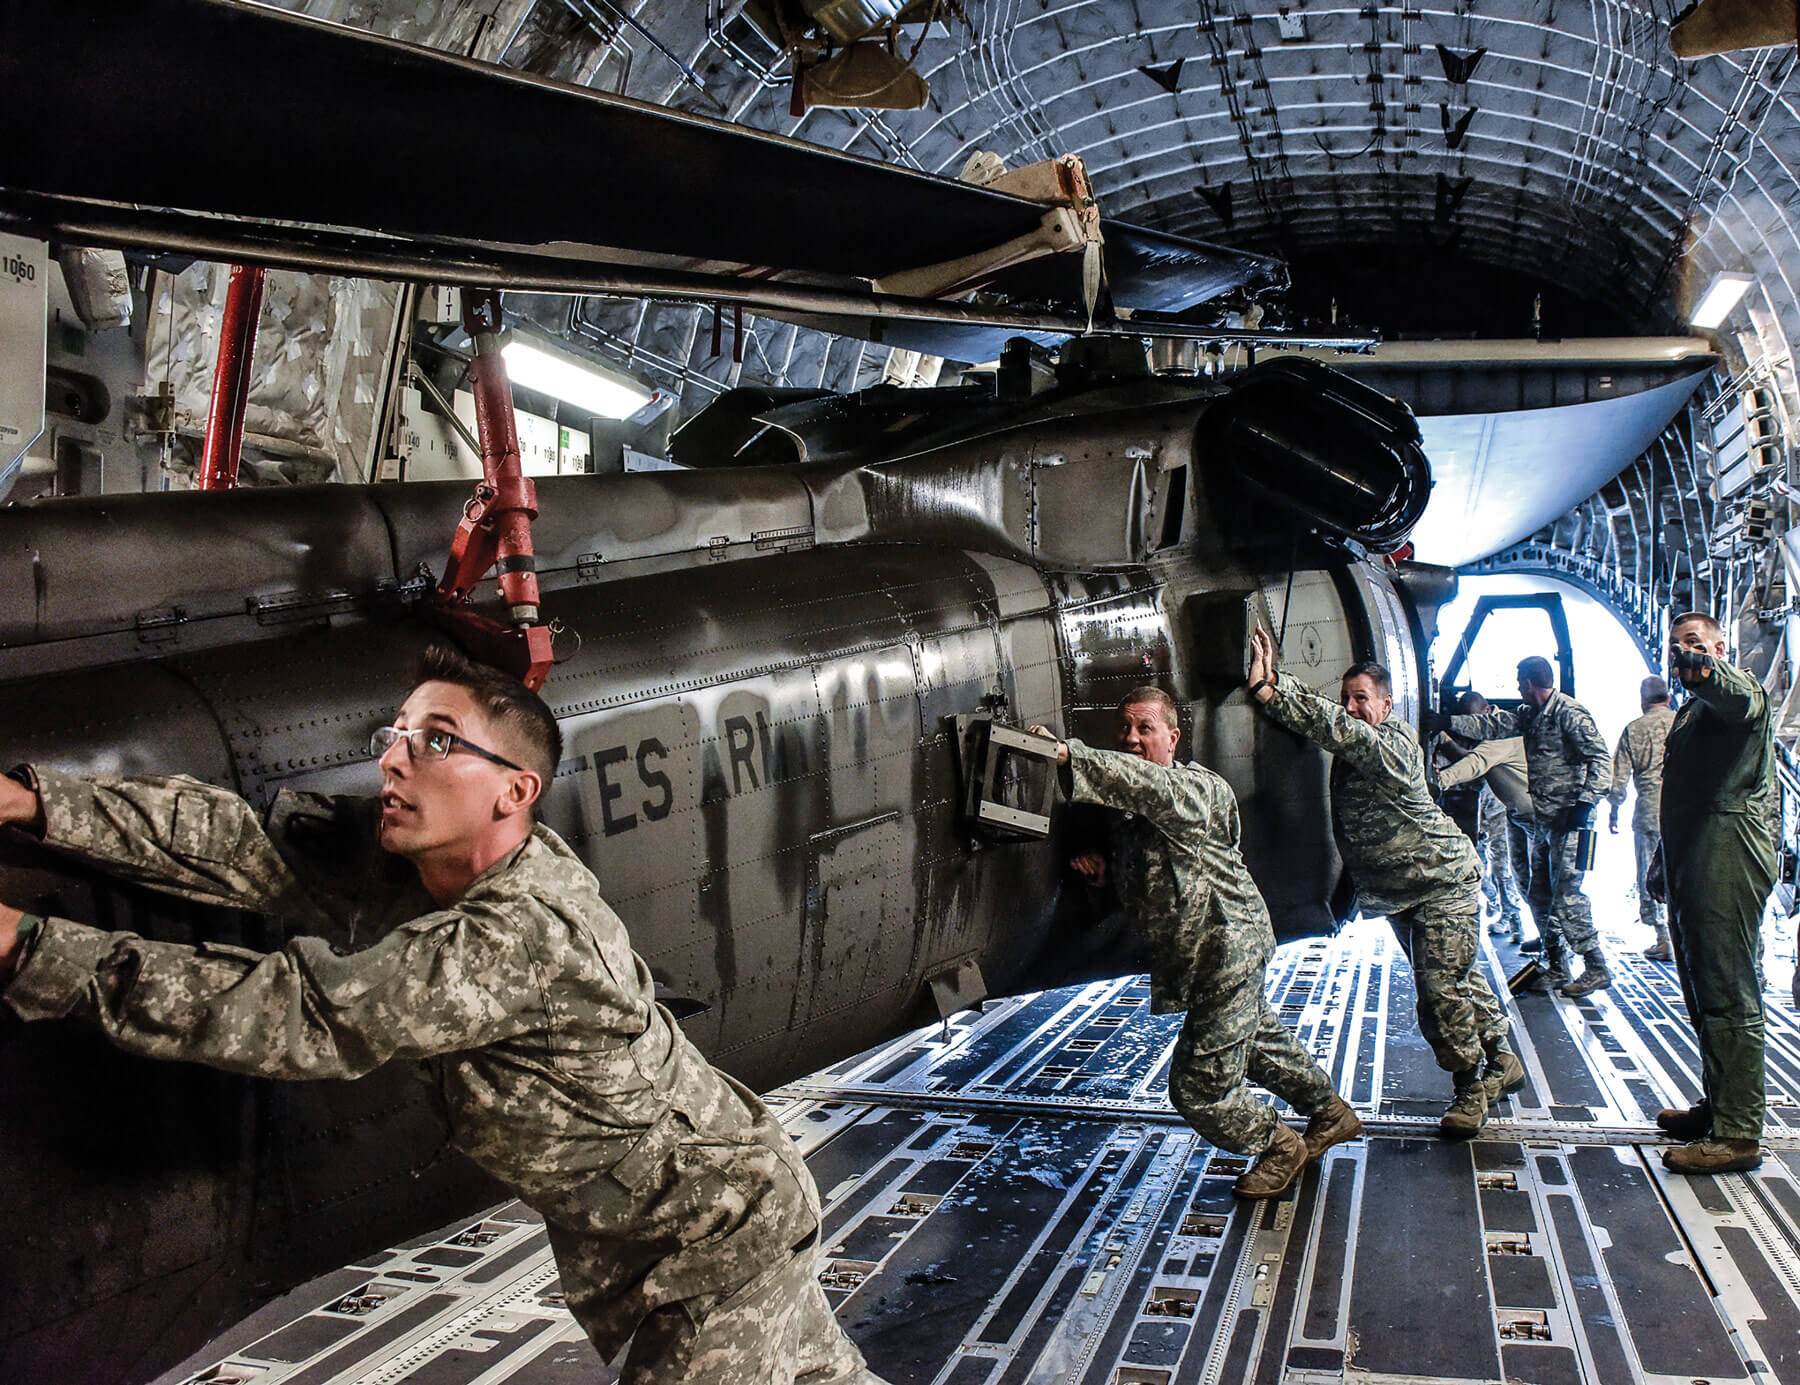 Tennessee National Guard Soldiers push a UH-60 Black Hawk into a C-17 aircraft carrier at Joint Base Berry Field, Nashville, Tenn. The Tennessee Guard deployed to the U.S. Virgin Islands to support disaster relief efforts and provide humanitarian aid in the aftermath of Hurricane Irma.